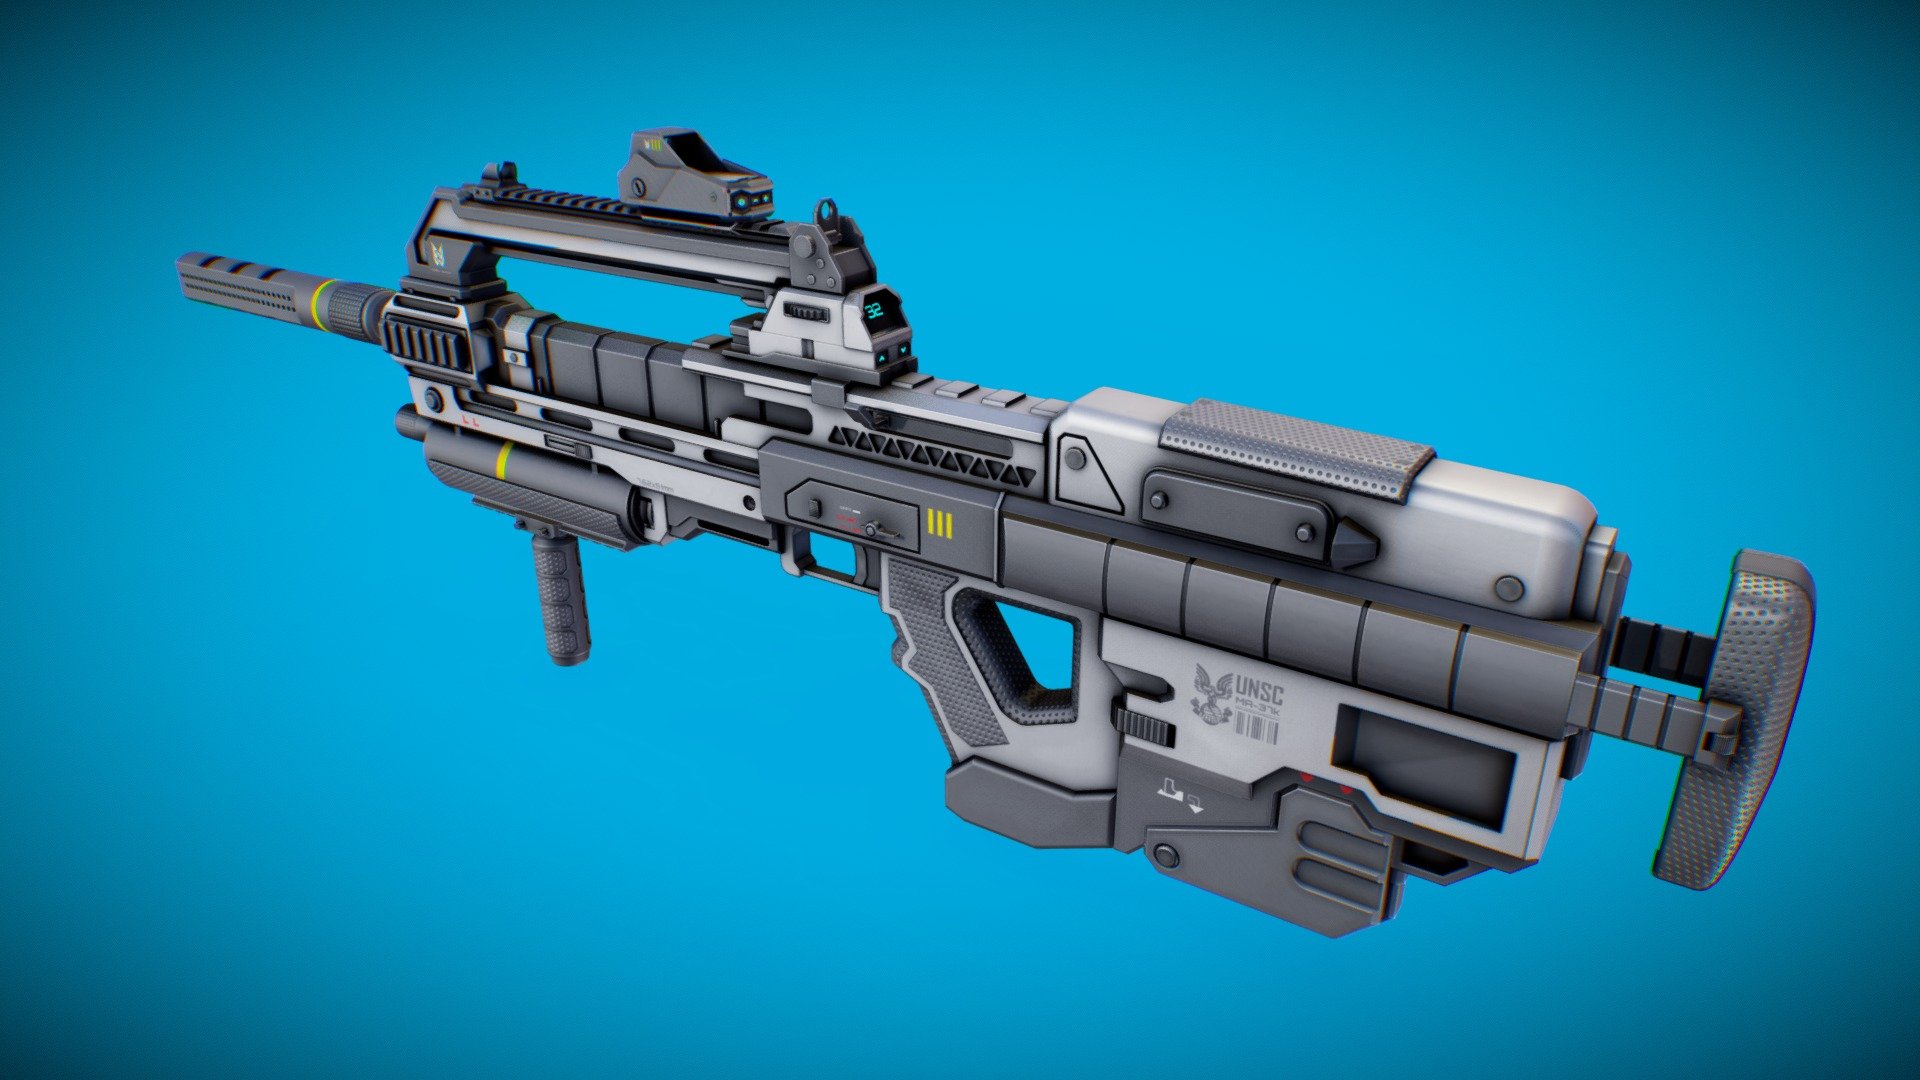 A concept for a carabine version off the MA37 Assault Rifle seen in Halo Reach

Check out render images and other projects here: artstation.com/forkyforklift - MA37k - Halo Reach Carabine Concept - Buy Royalty Free 3D model by ForkyForklift 3d model